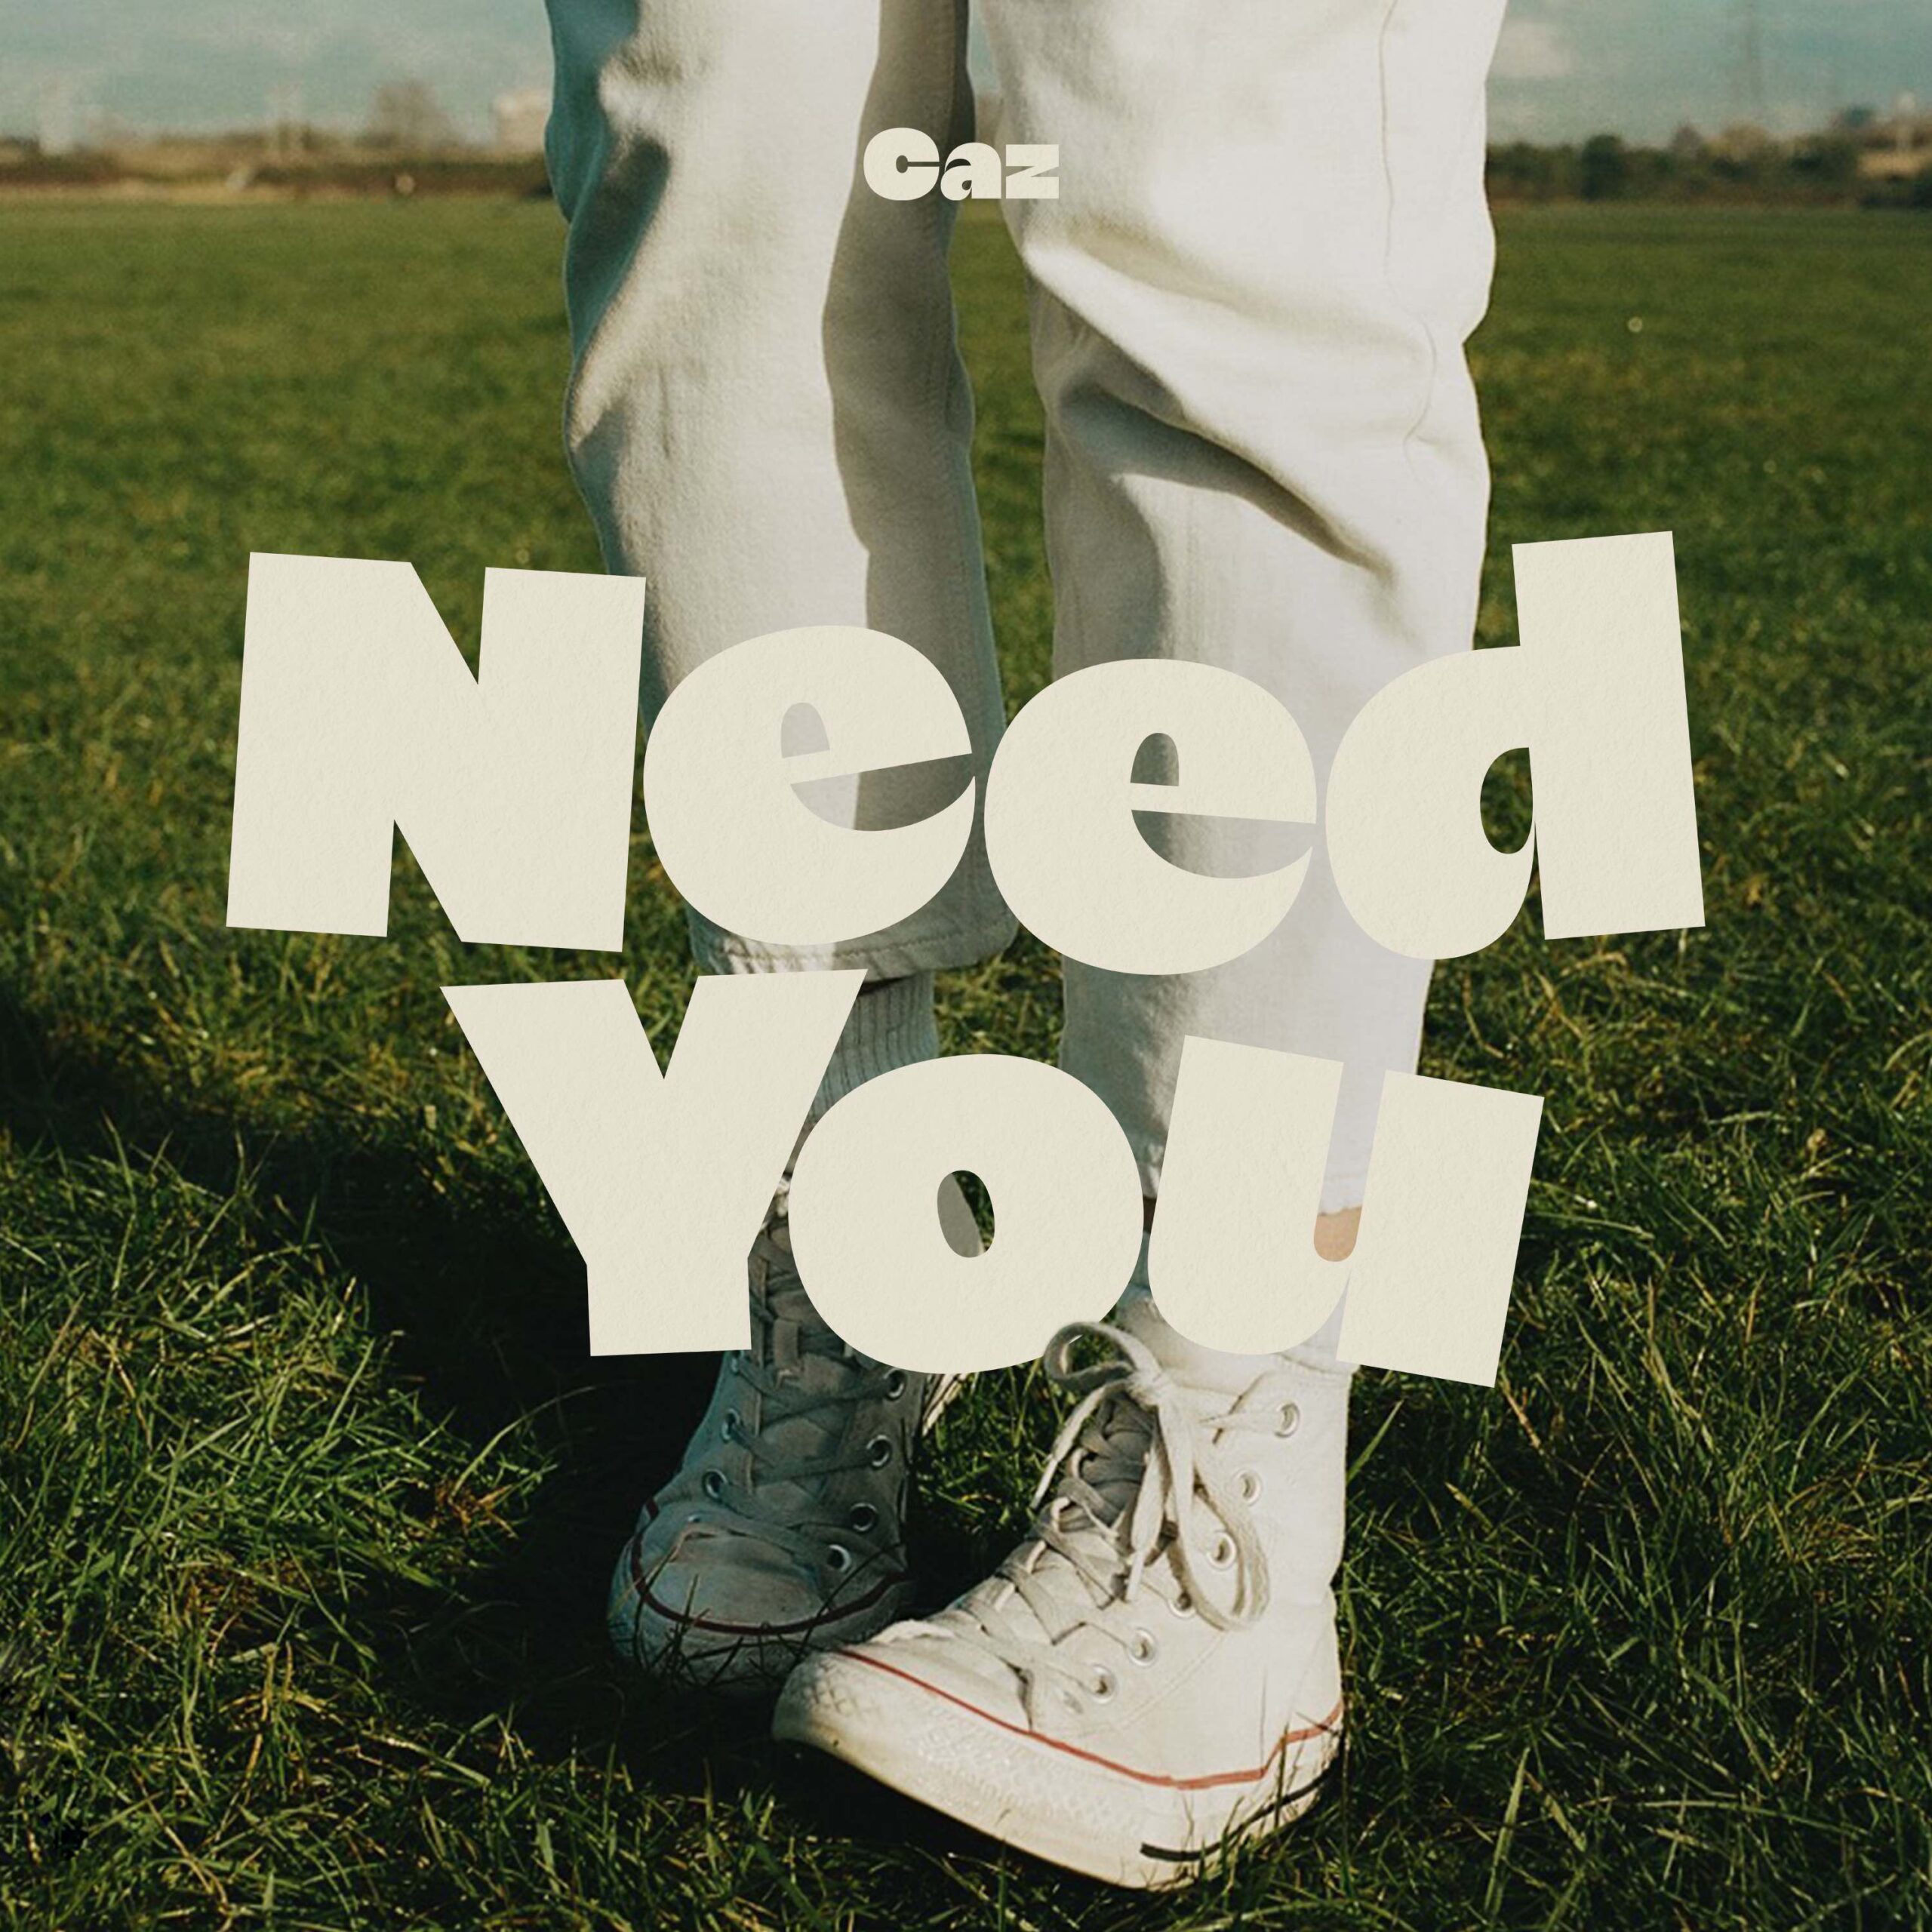 CAZ – NEED YOU – OUT NOW